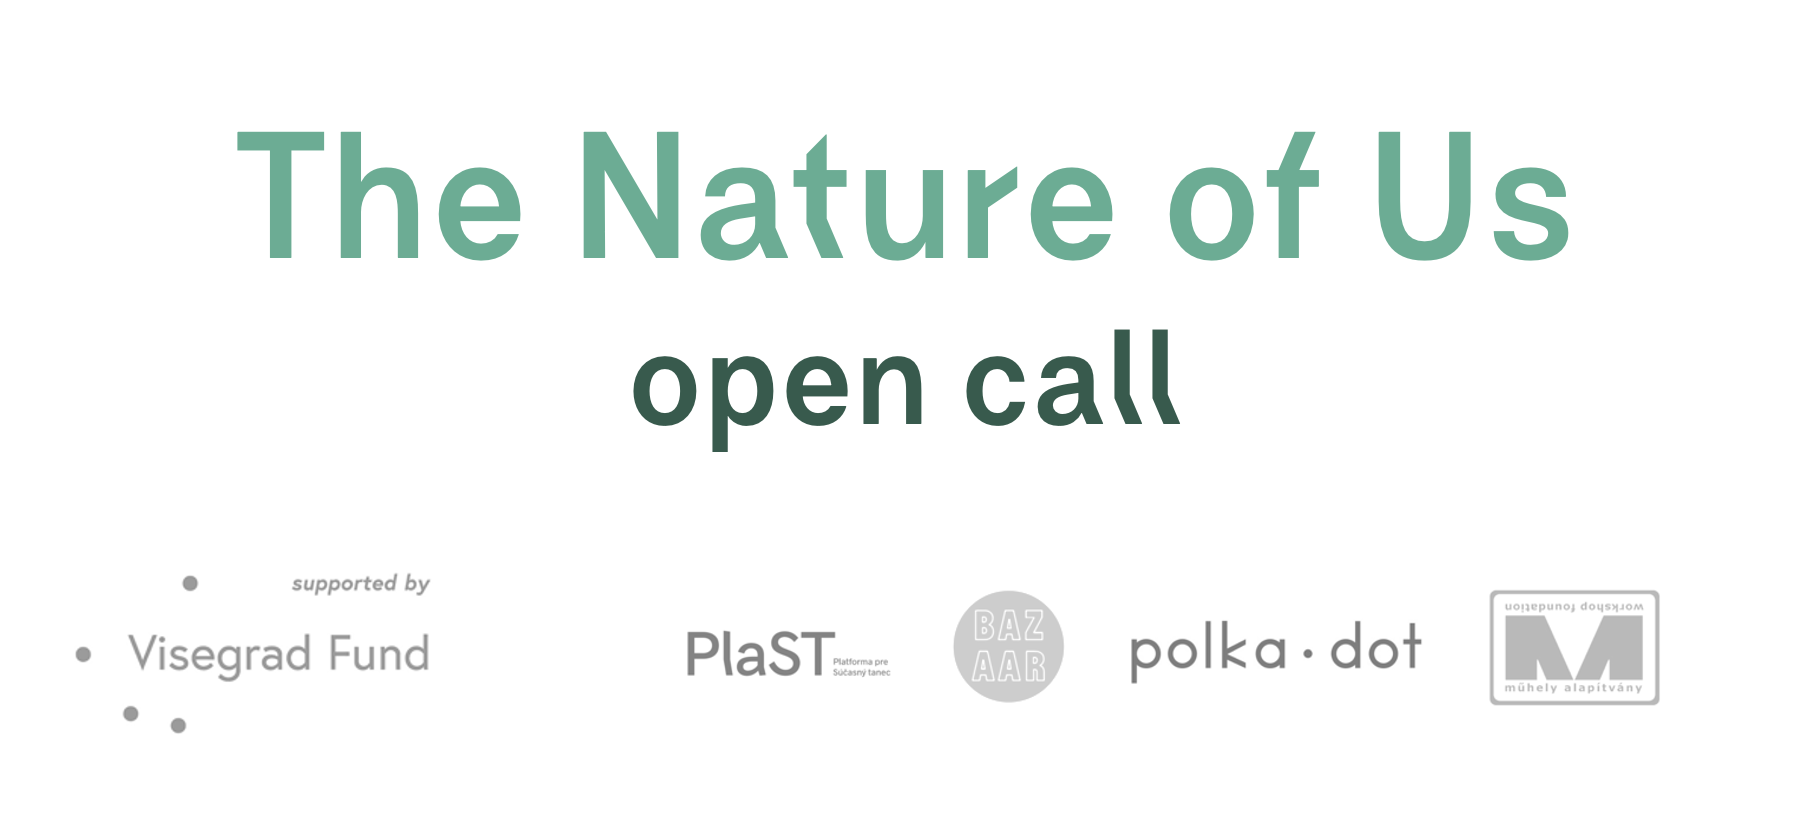 OPEN CALL: THE NATURE OF US